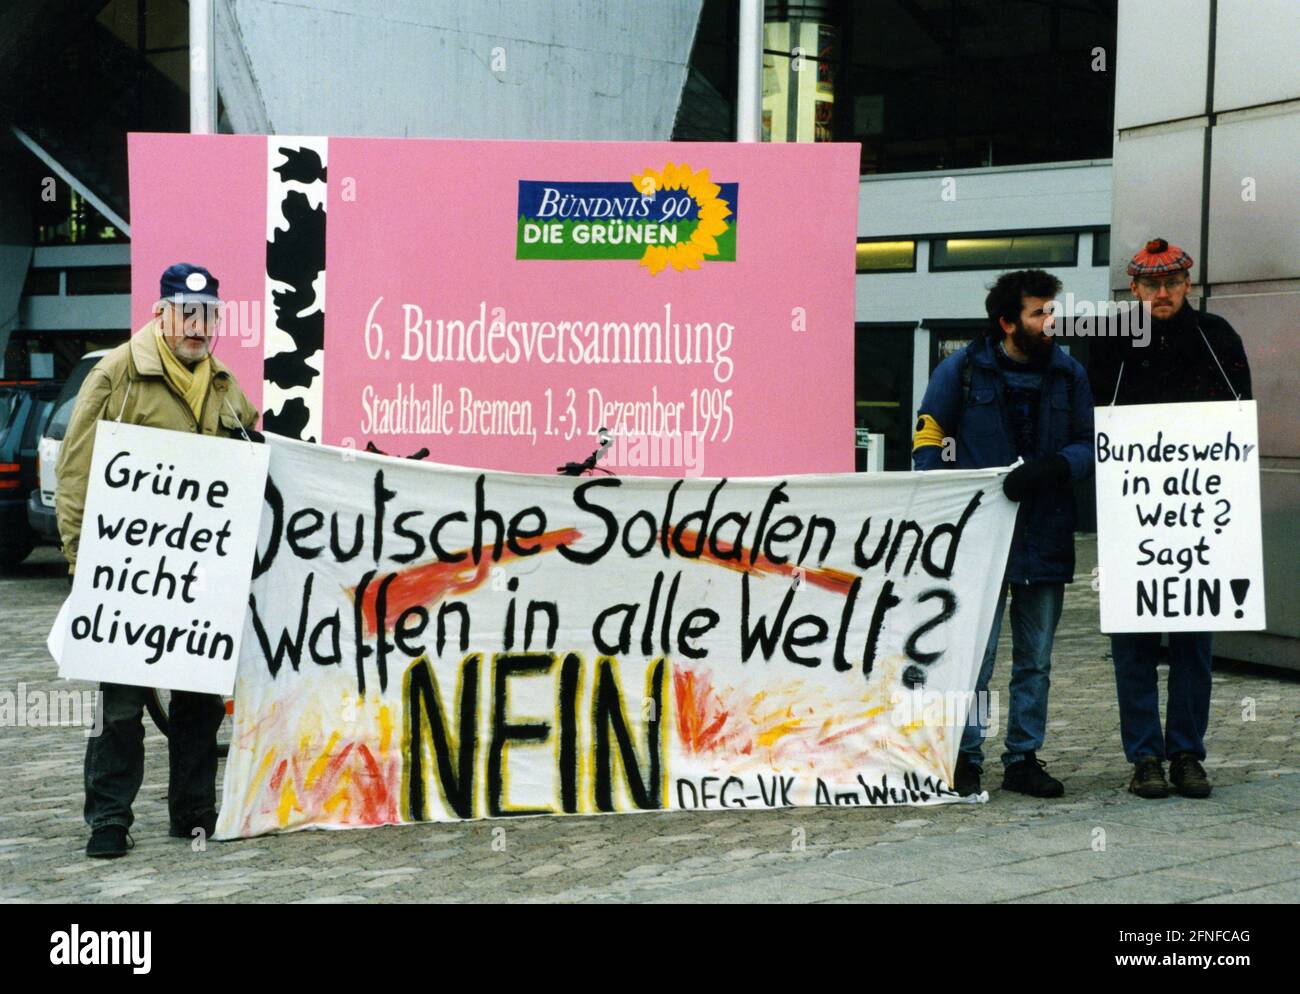 Citizens demonstrate against sending German soldiers and weapons abroad in front of the 6th federal convention of Bündnis 90/Die Grünen in Bremen's Stadthalle. [automated translation] Stock Photo